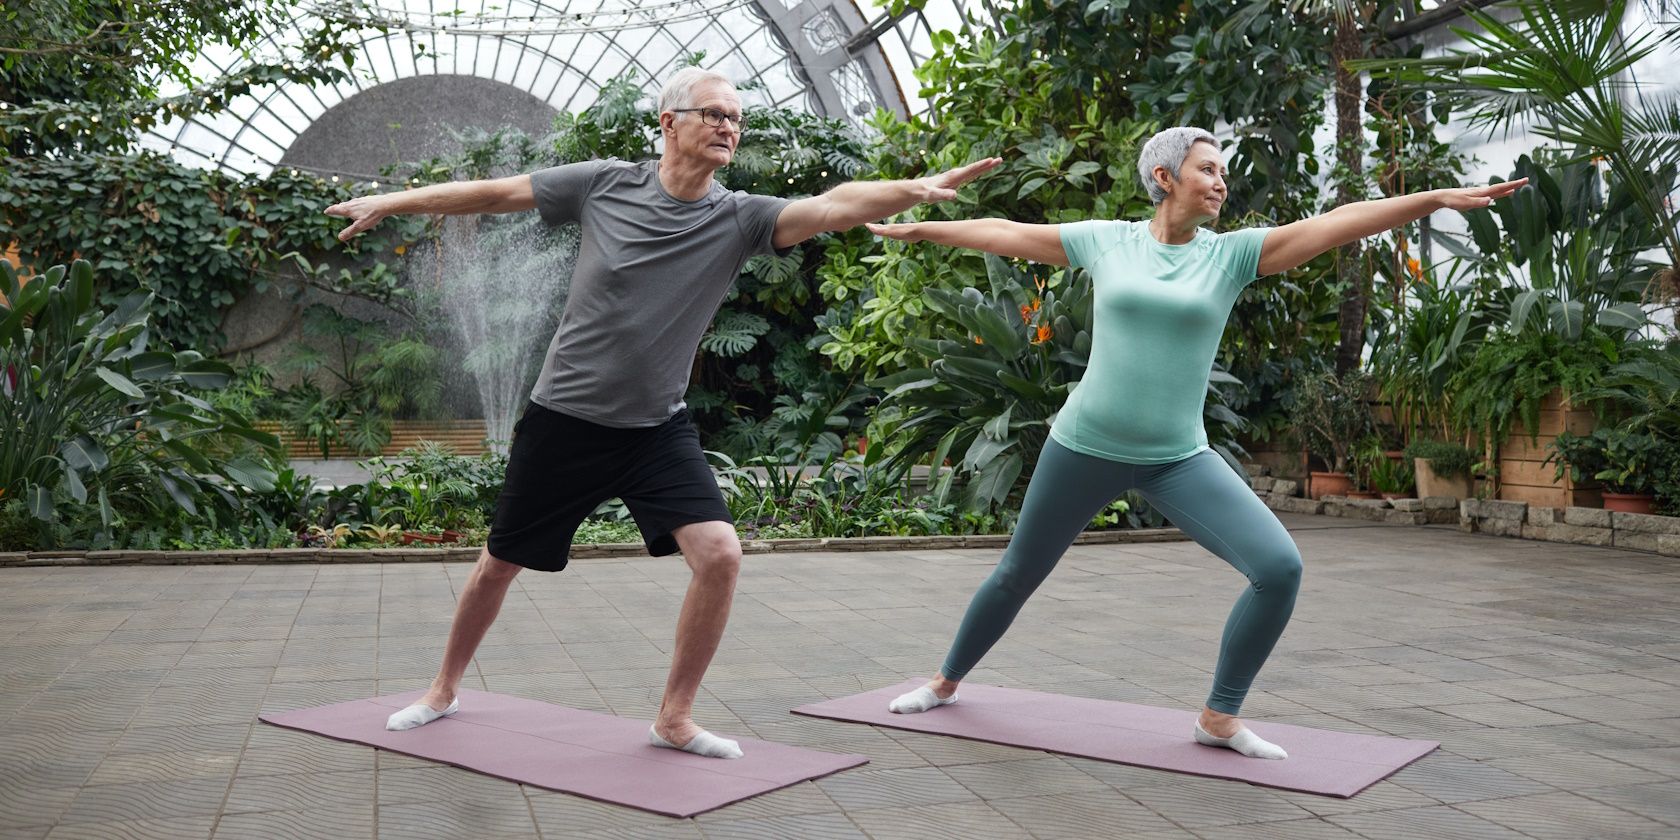 Better Living Yoga | Senior Stretches The Best Yoga Poses for Aging Adults  - Guest Blog by A Place for Mom